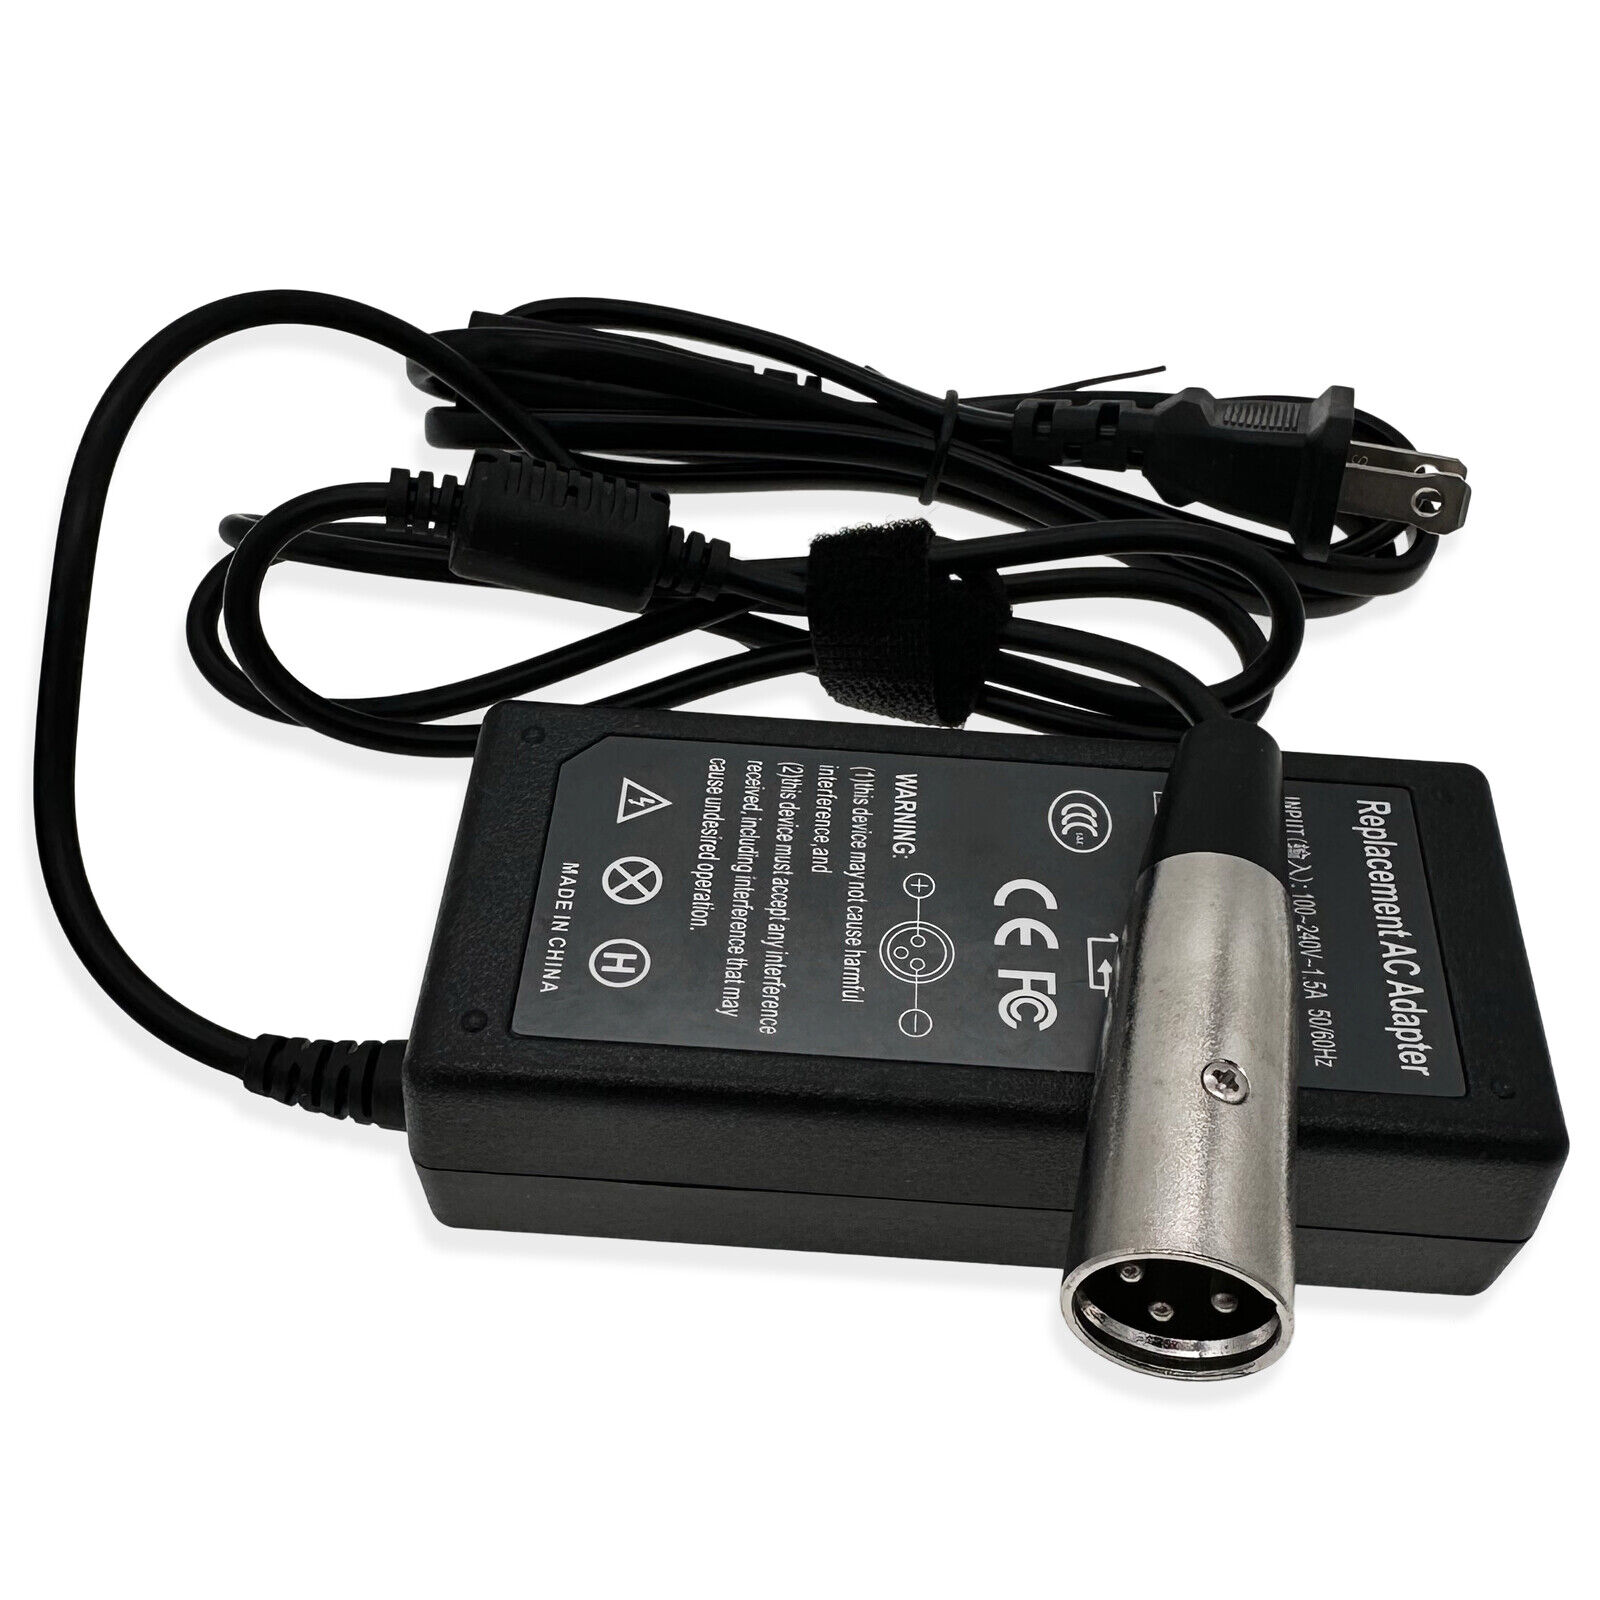 24V 2A Battery Charger for Mongoose Z350 COSMIC FUSION HORNET ROCKET FS Scooter Item SpecificationInput: AC 100-240V 5